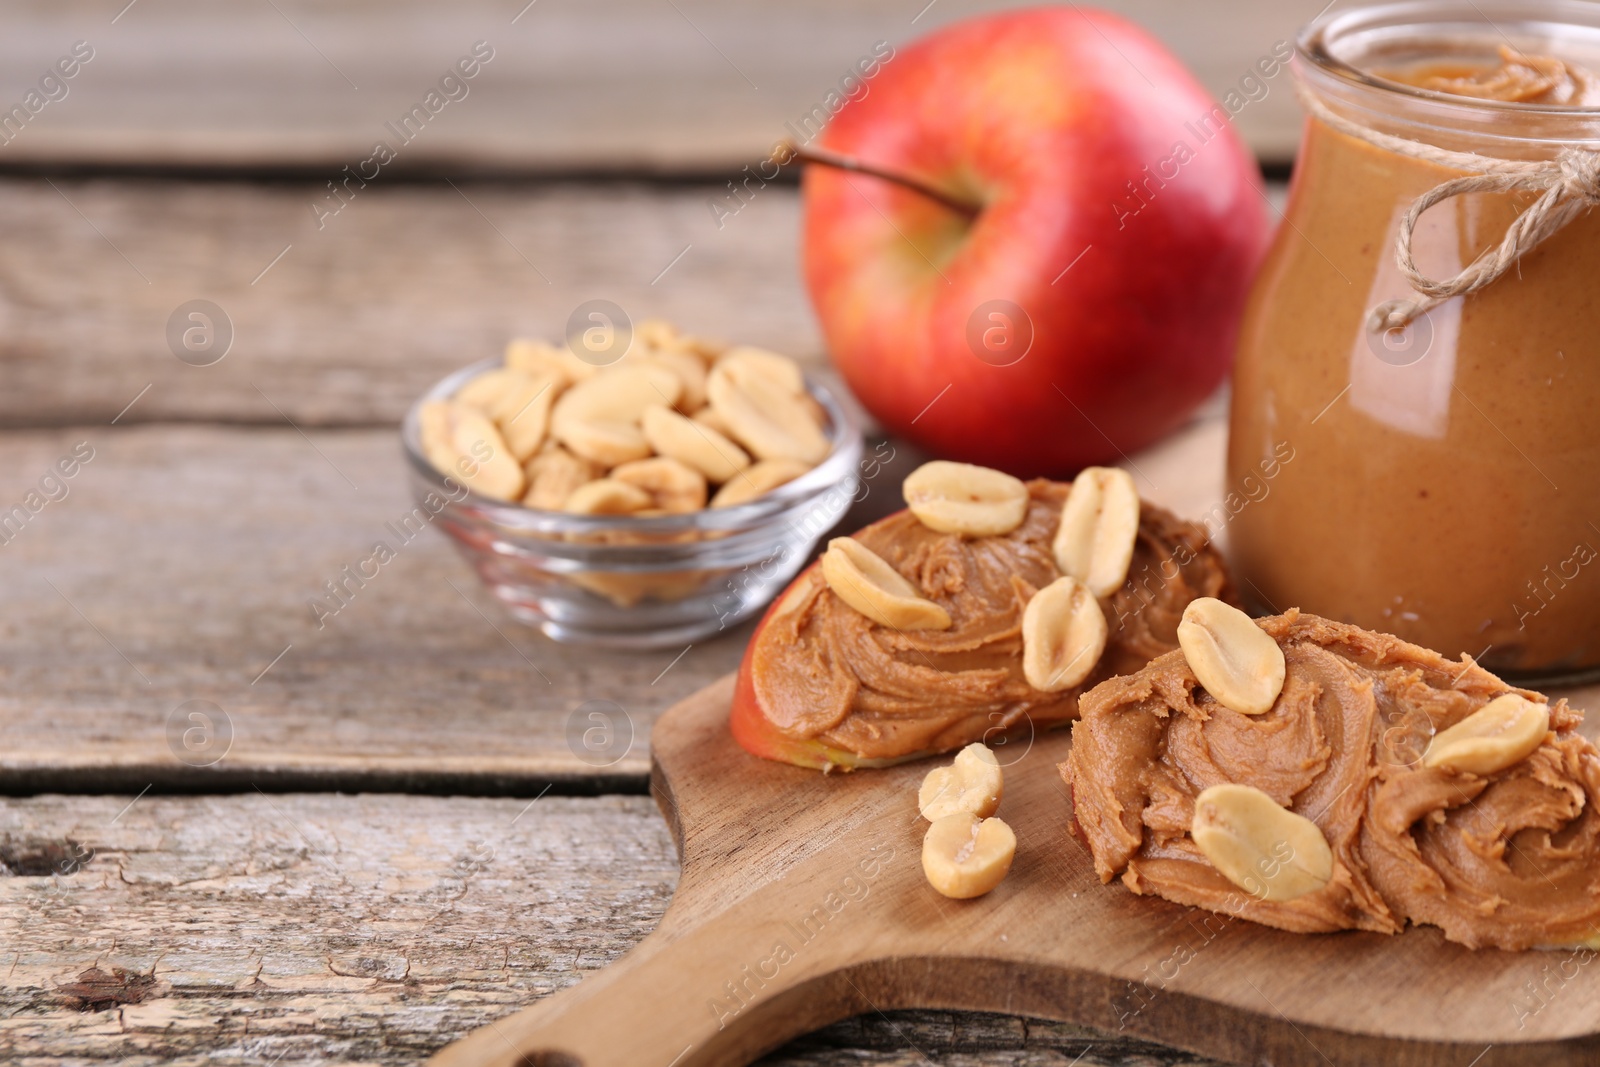 Photo of Fresh apples with peanut butter on wooden table, space for text